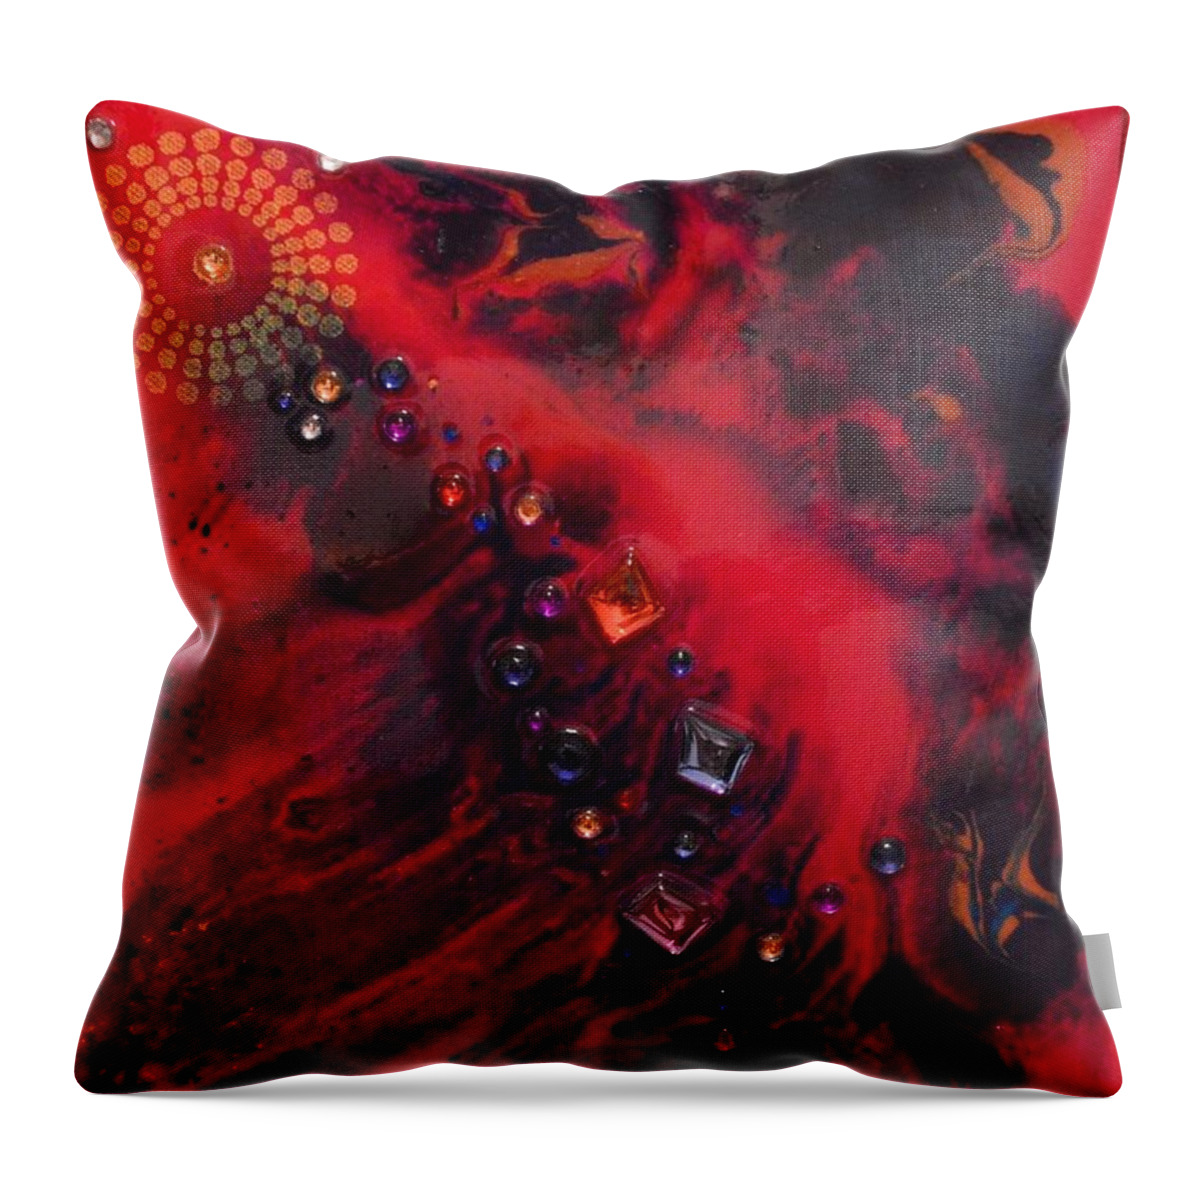 Space Throw Pillow featuring the painting Space Poppies by MiMi Stirn